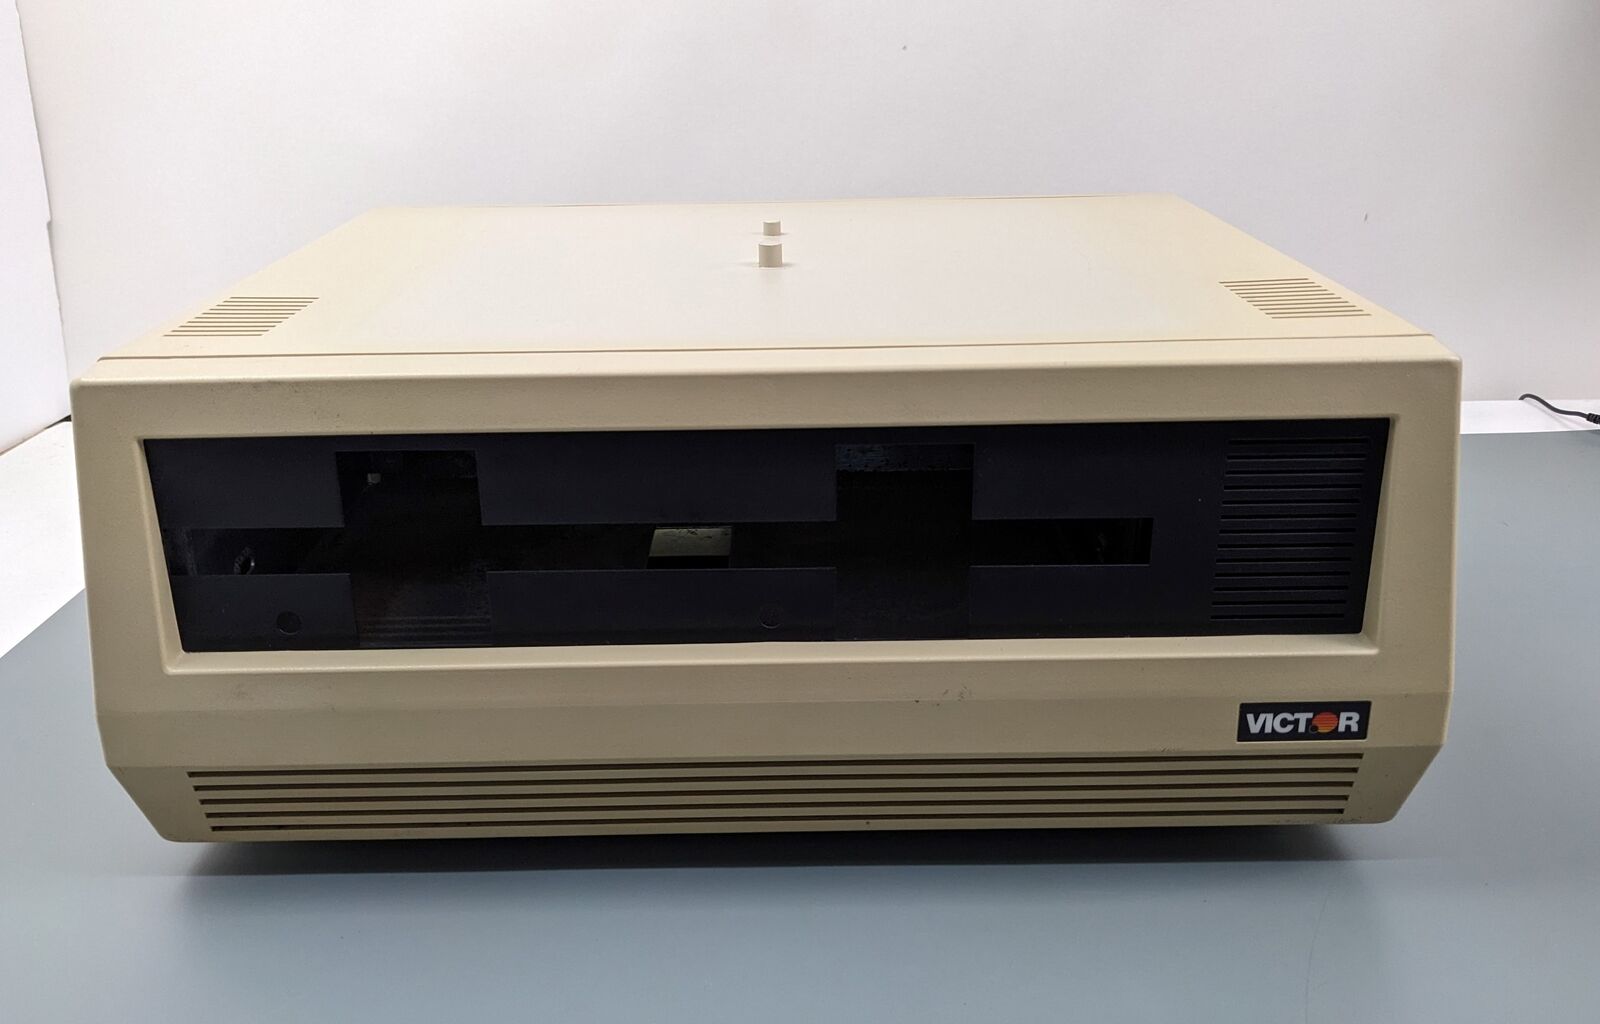 Victor 9000 Computer Case - RARE Later Style - Yellowed